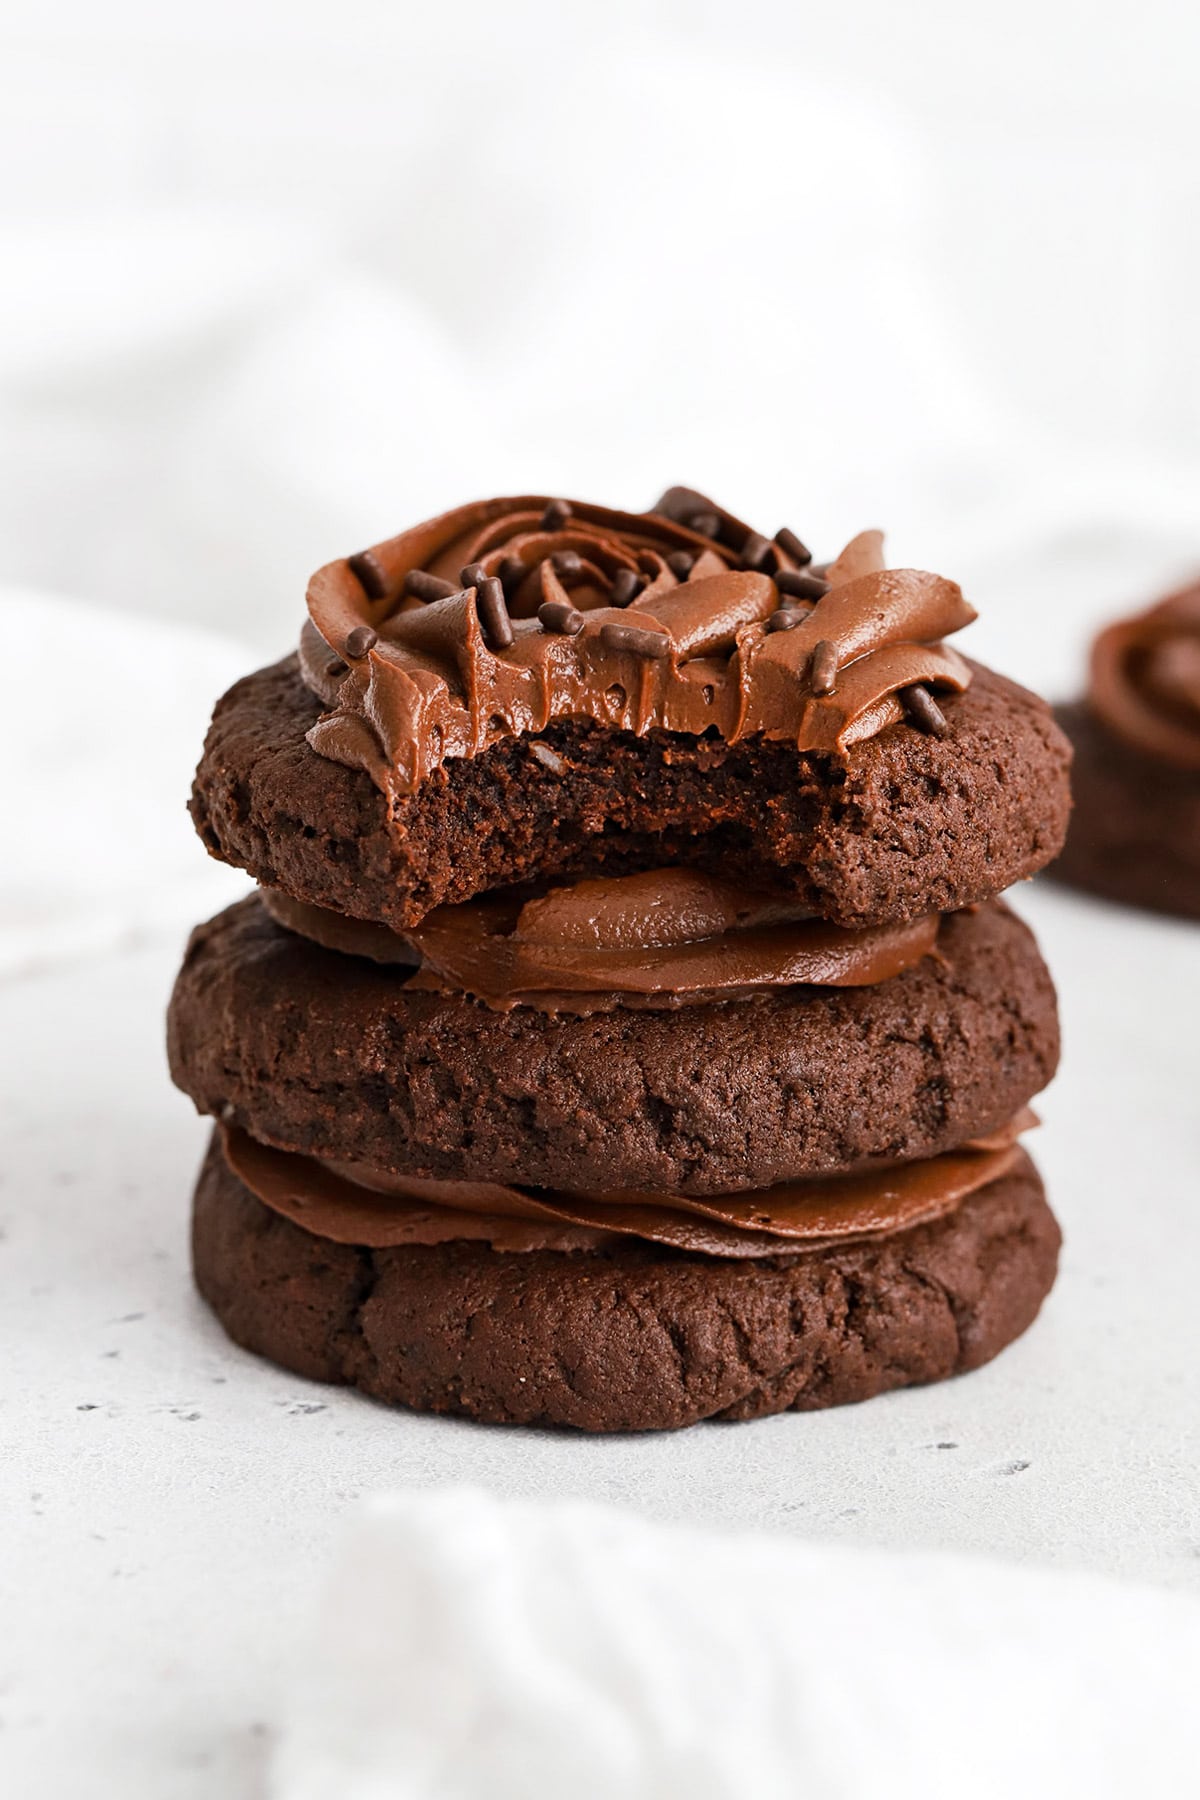 Front view of a stack of gluten-free crumbl chocolate cake cookies with chocolate frosting. One cookie has a bite taken out of it revealing the soft cakey center.